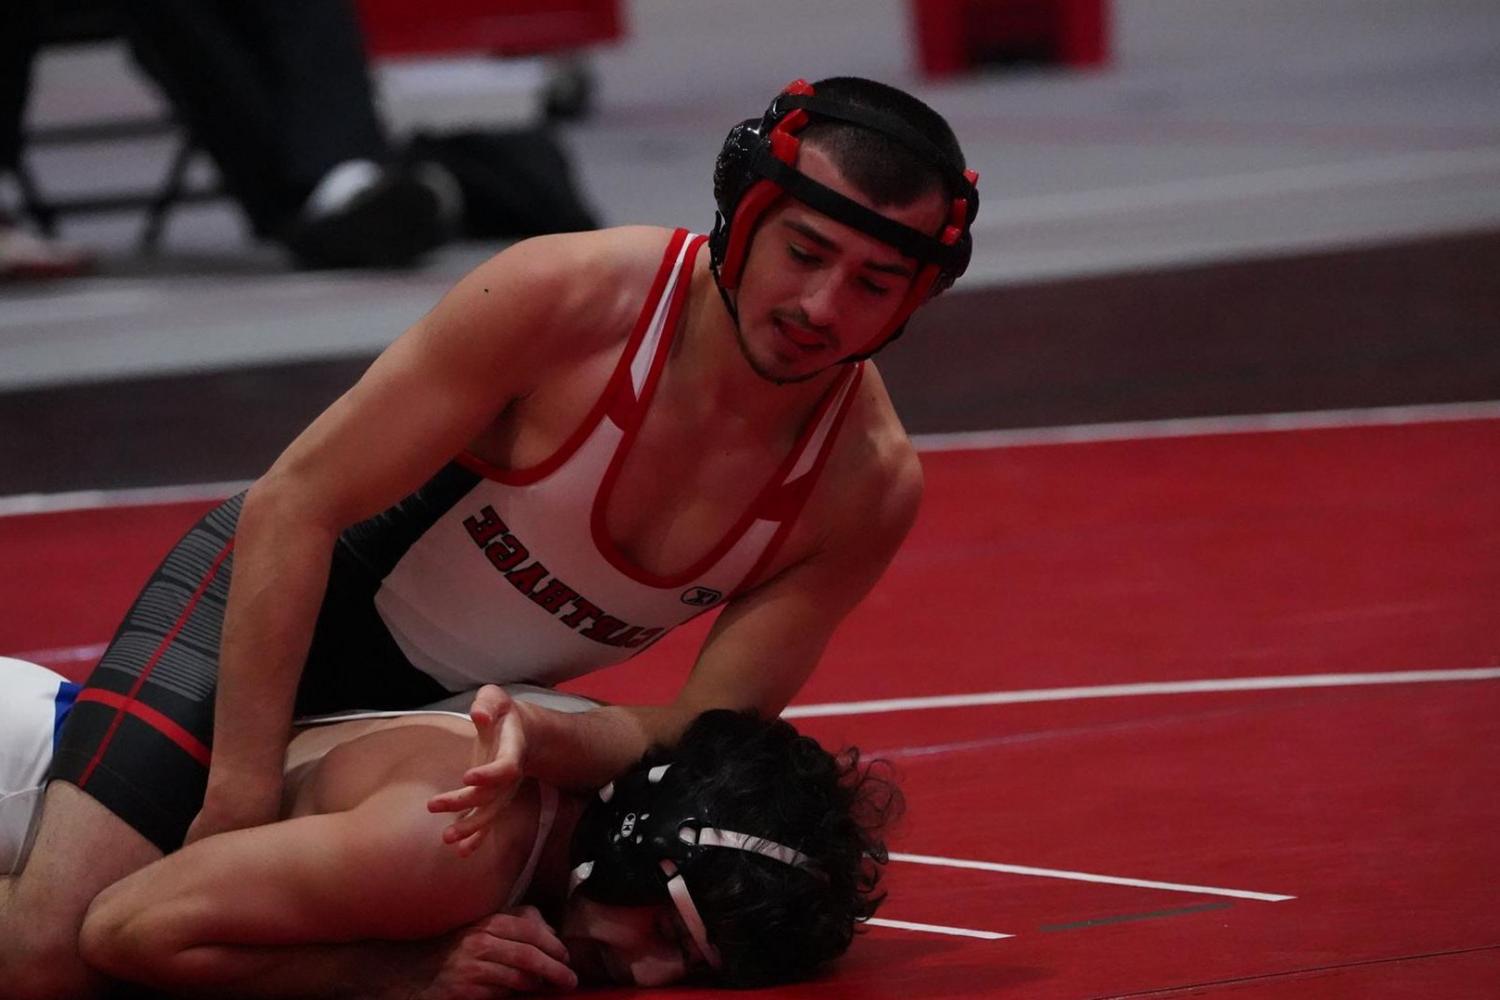 Carthage broadened its sports offerings in 2020-21 with the revival of men?s wrestling, and the a...